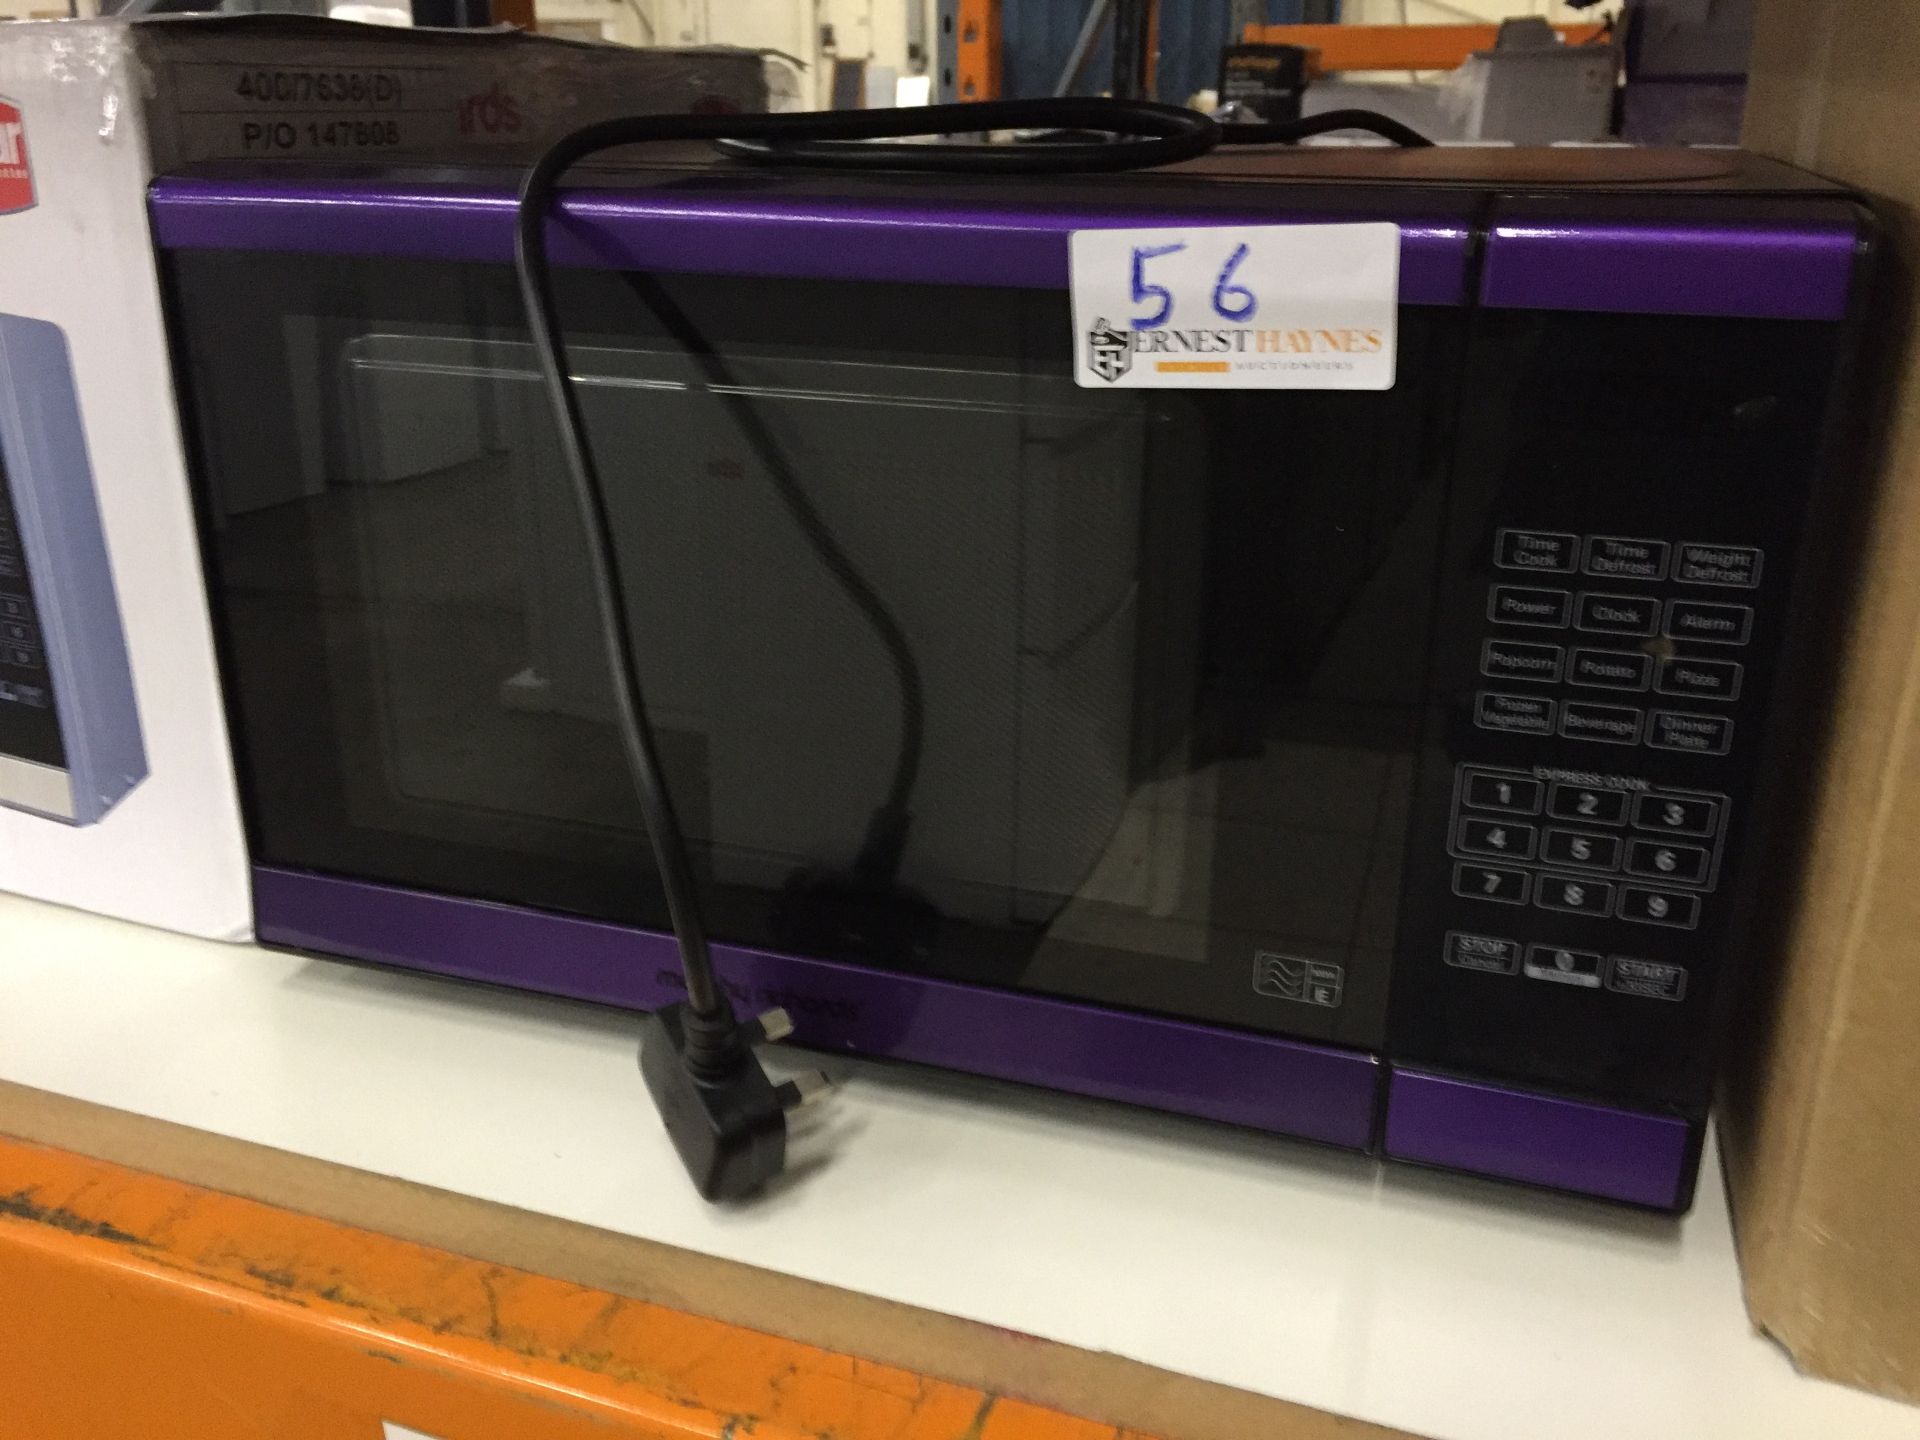 Morphy Richards 800W microwave, Purple, working, used, rusty from top